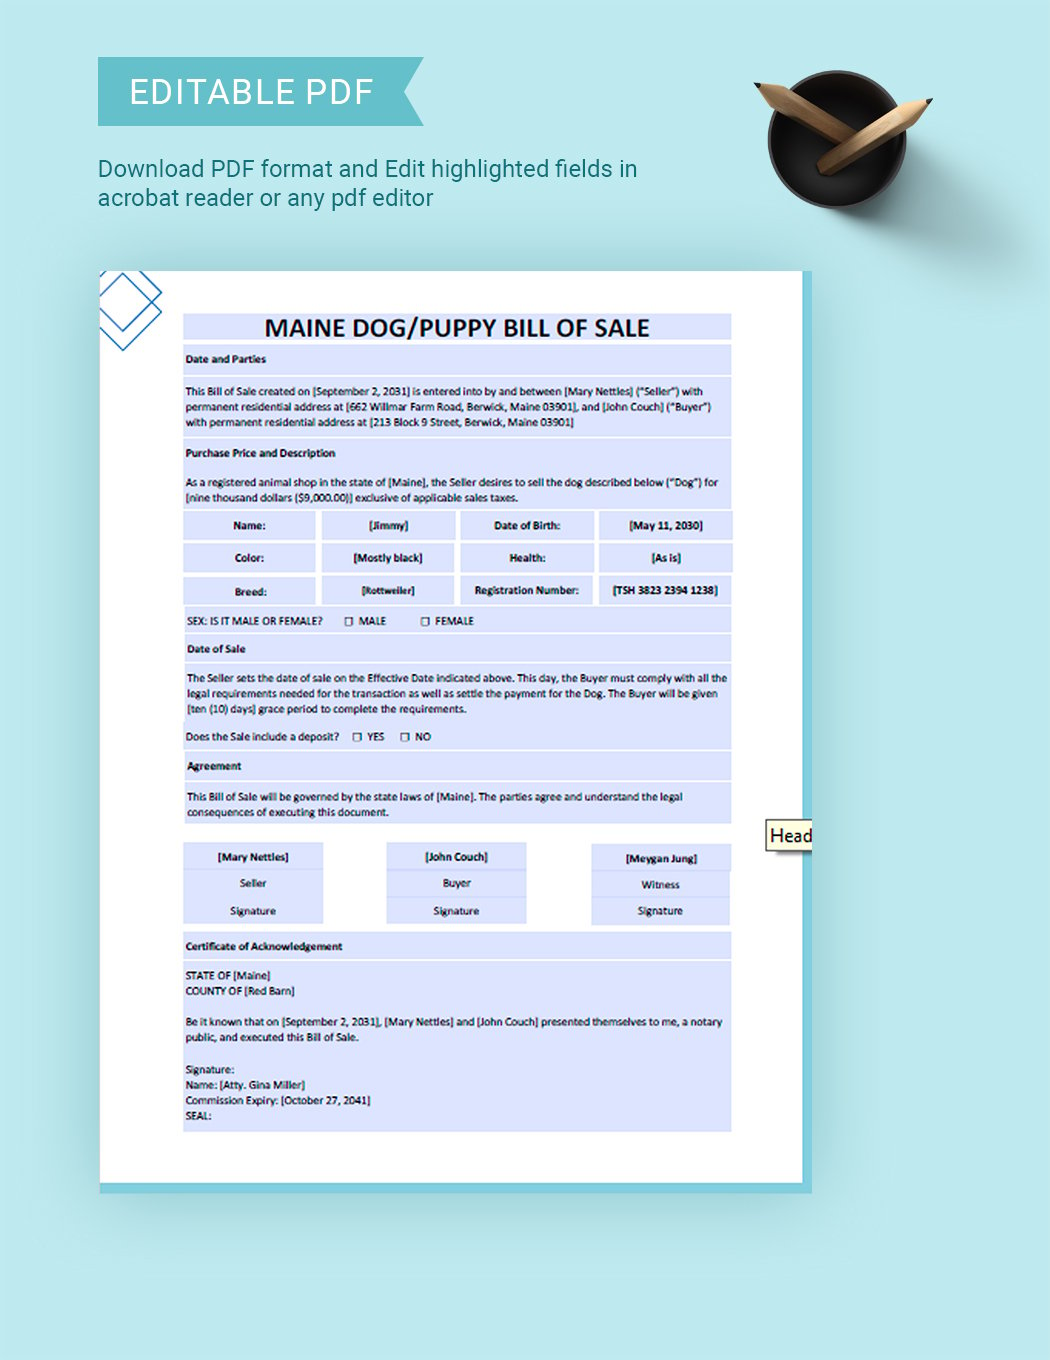 Maine Dog / Puppy Bill of Sale Template